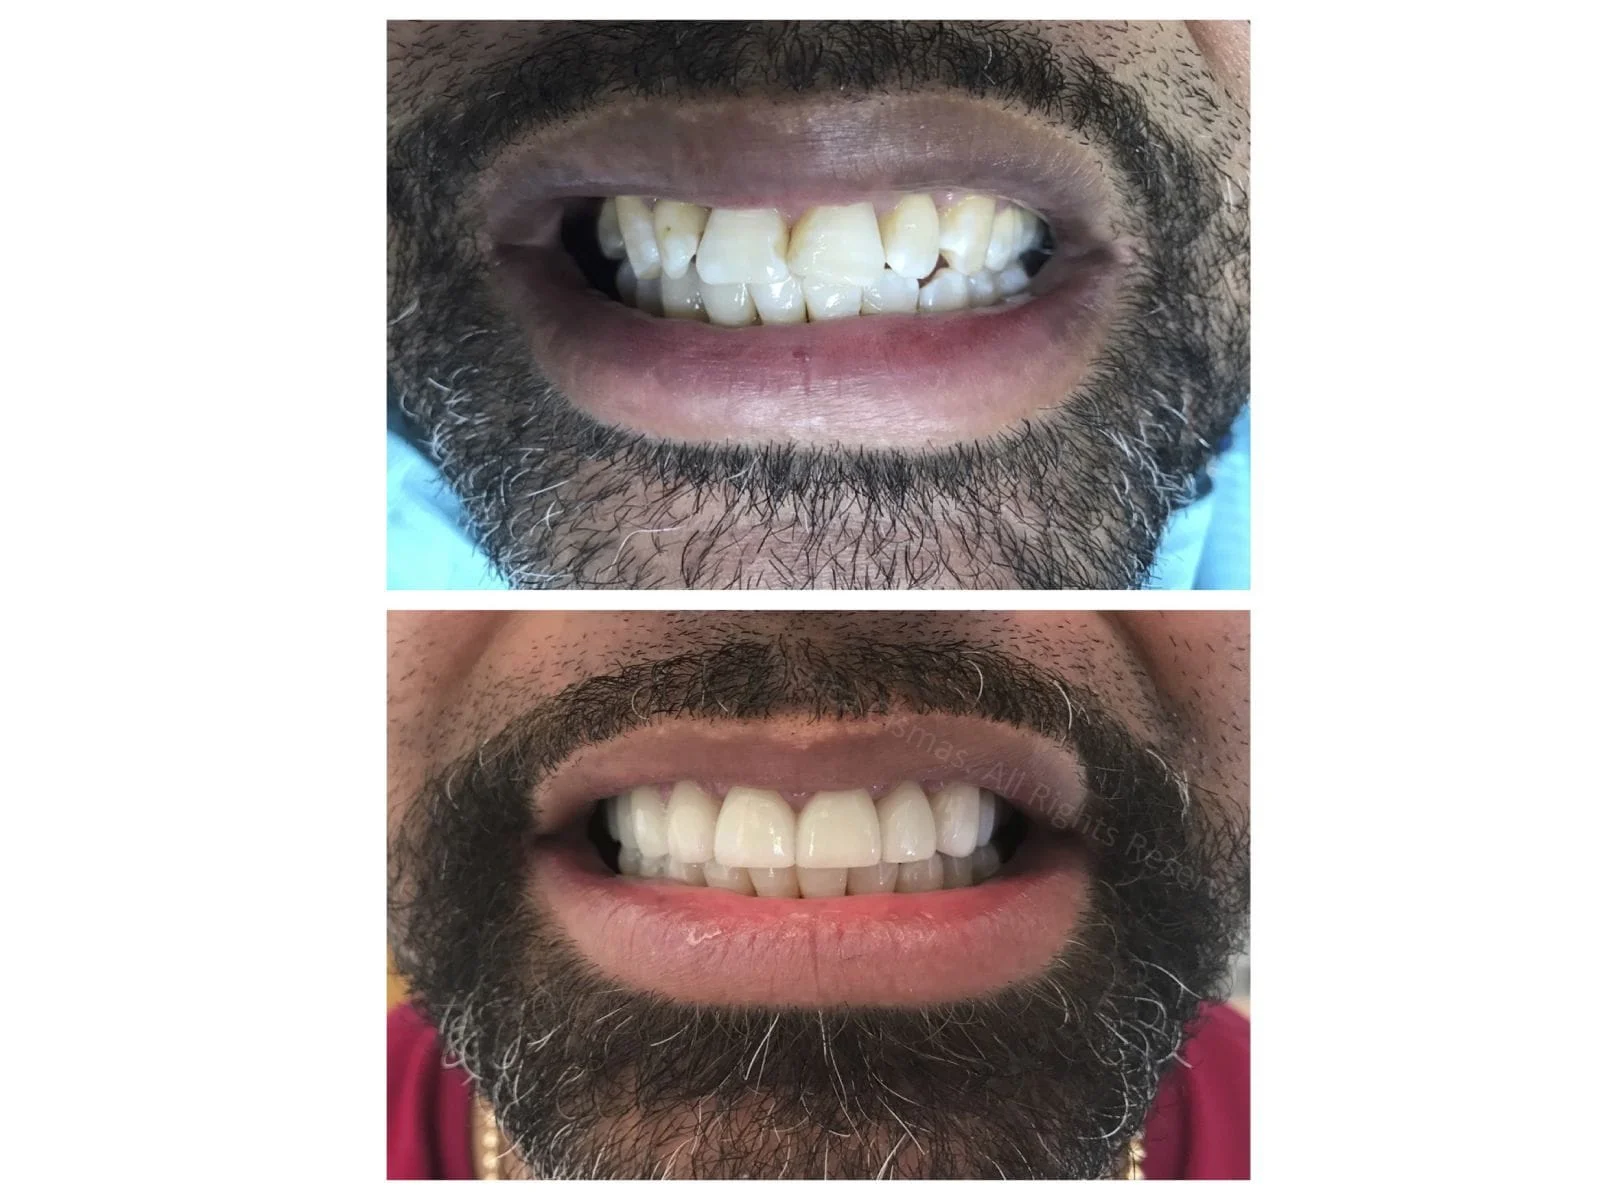 Porcelain veneers for this gentleman , makes all the difference. Dr. Jessica Cismas managed to create a unique look with natural looking porcelain veneers. For a limited time she offers complimentary consultations.